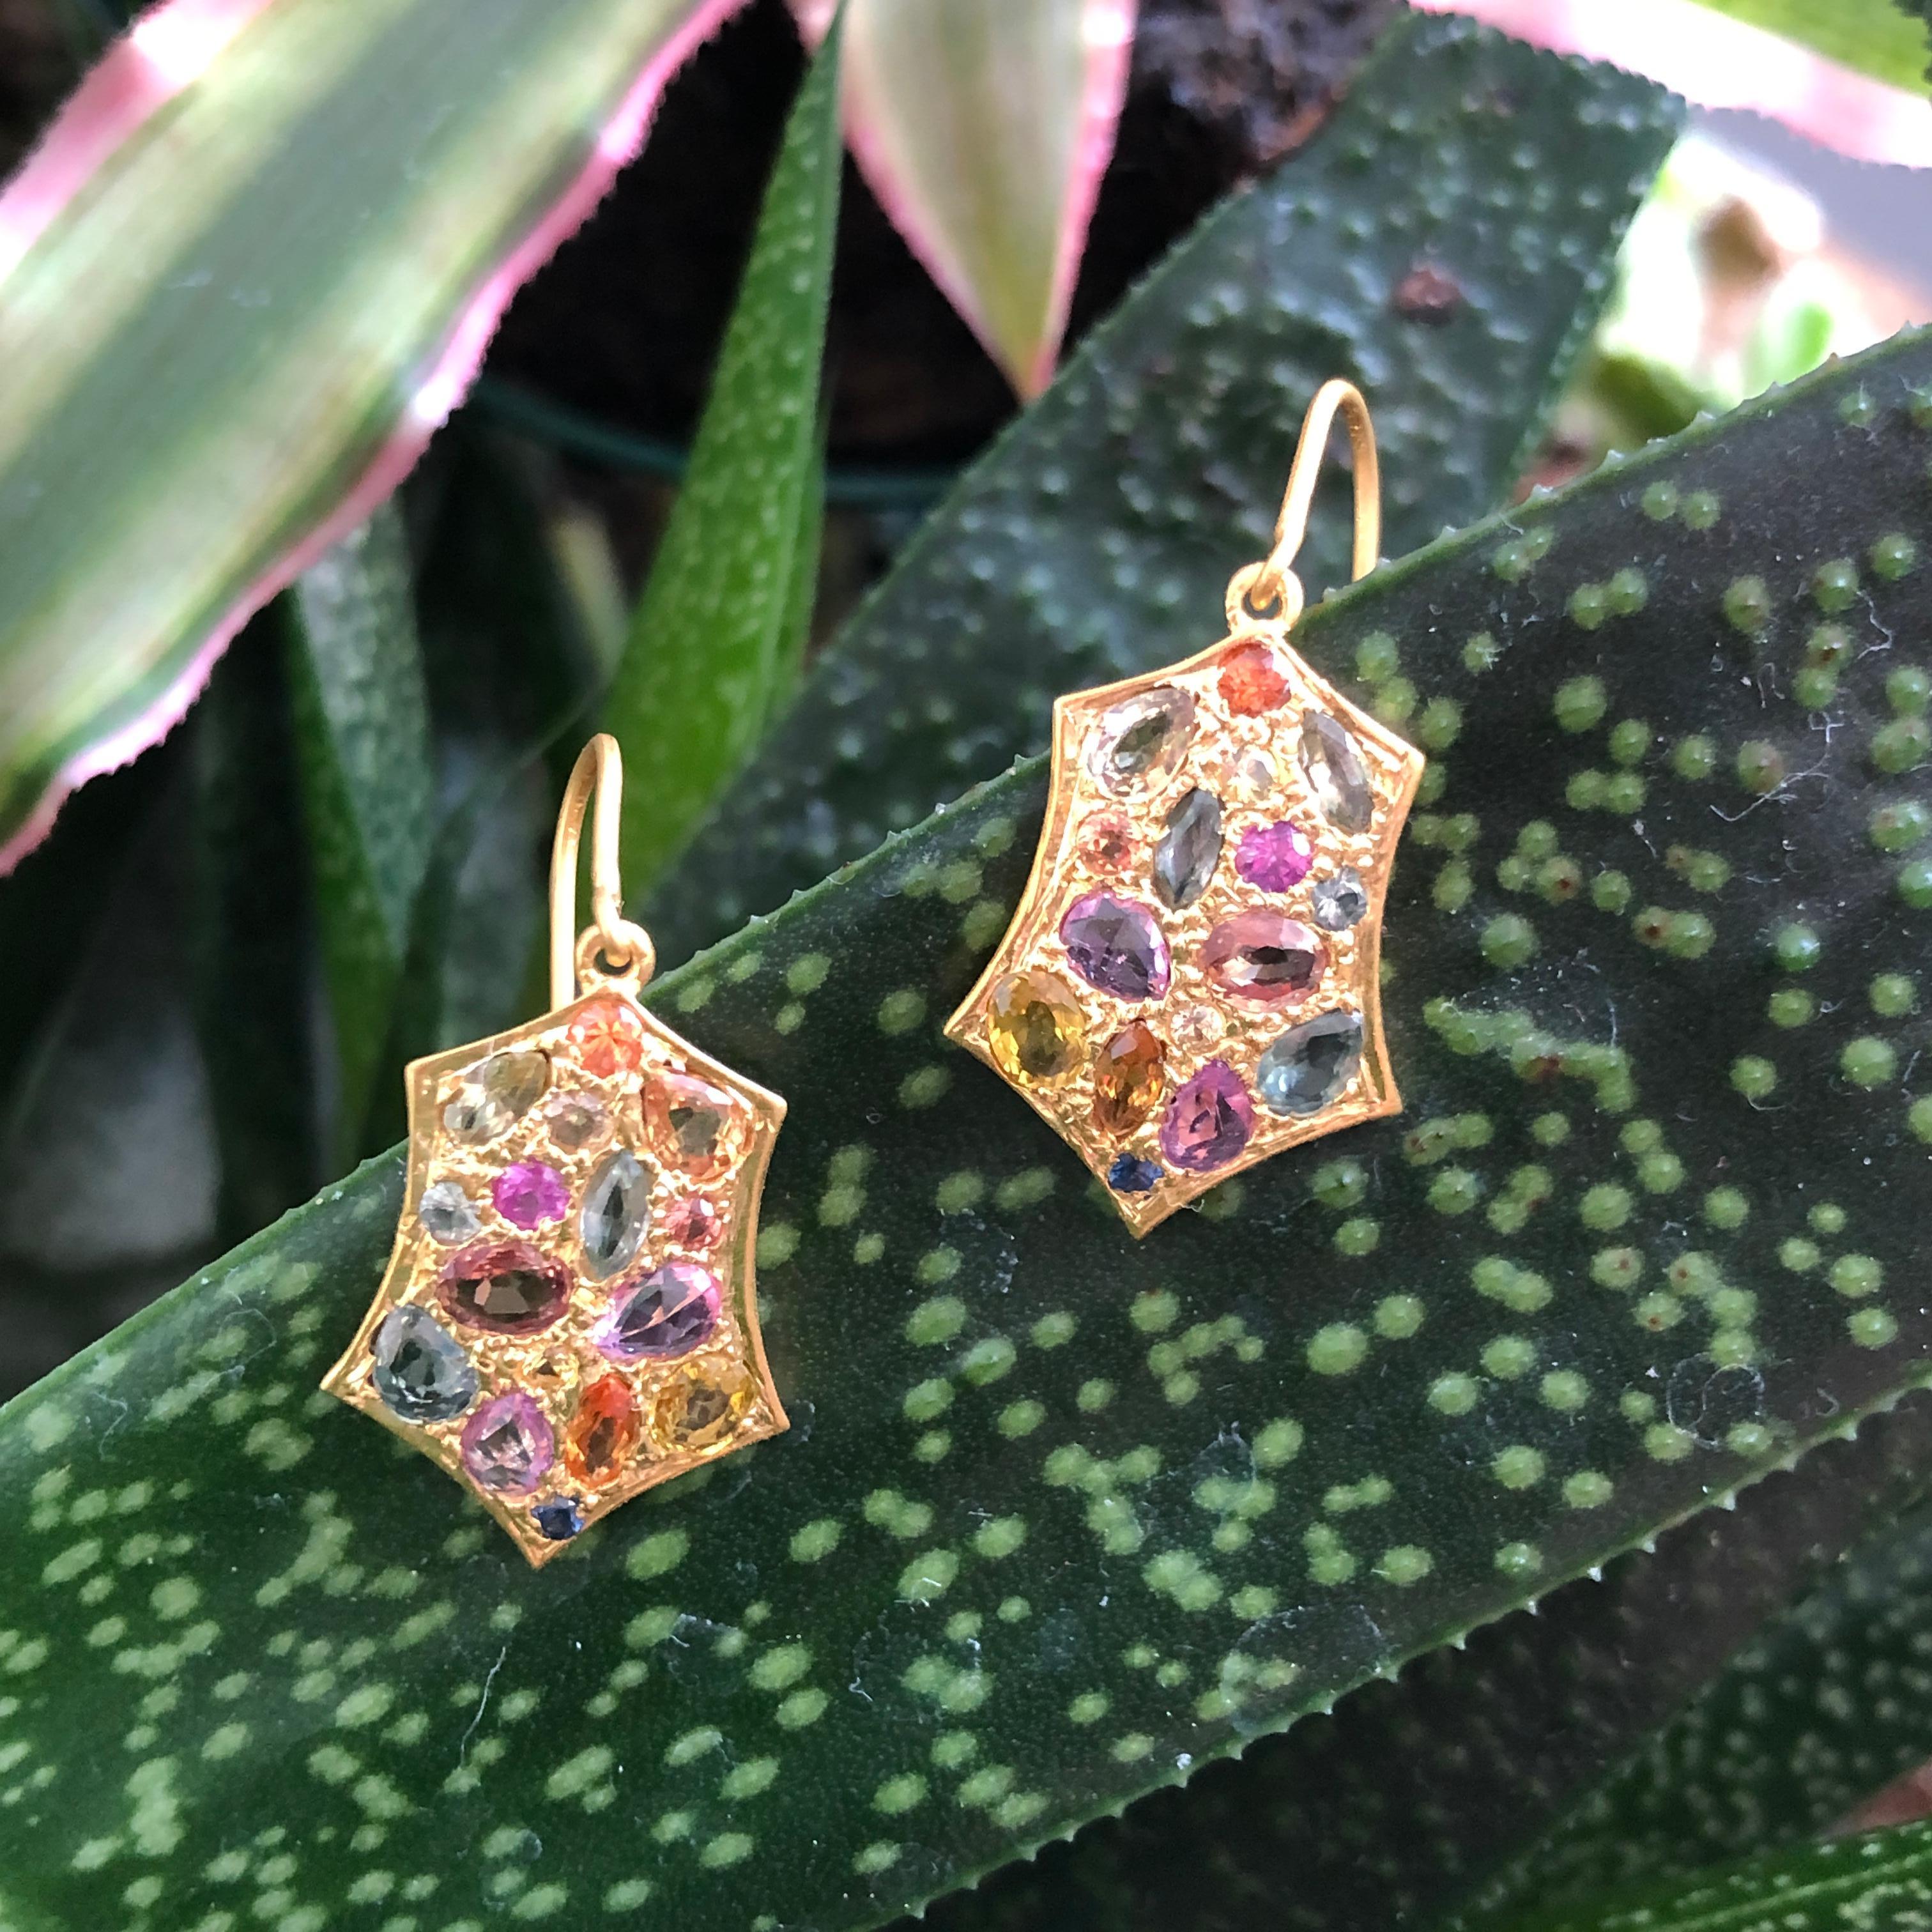 Designed by award winning Jewelry Designer, Lauren Harper, these 18kt Solid Gold hand made earrings feature faceted 3.24 cts of Multicolored Sapphires set in an intricate grain setting.  Sapphires range in color from pink, orange, yellow, green and